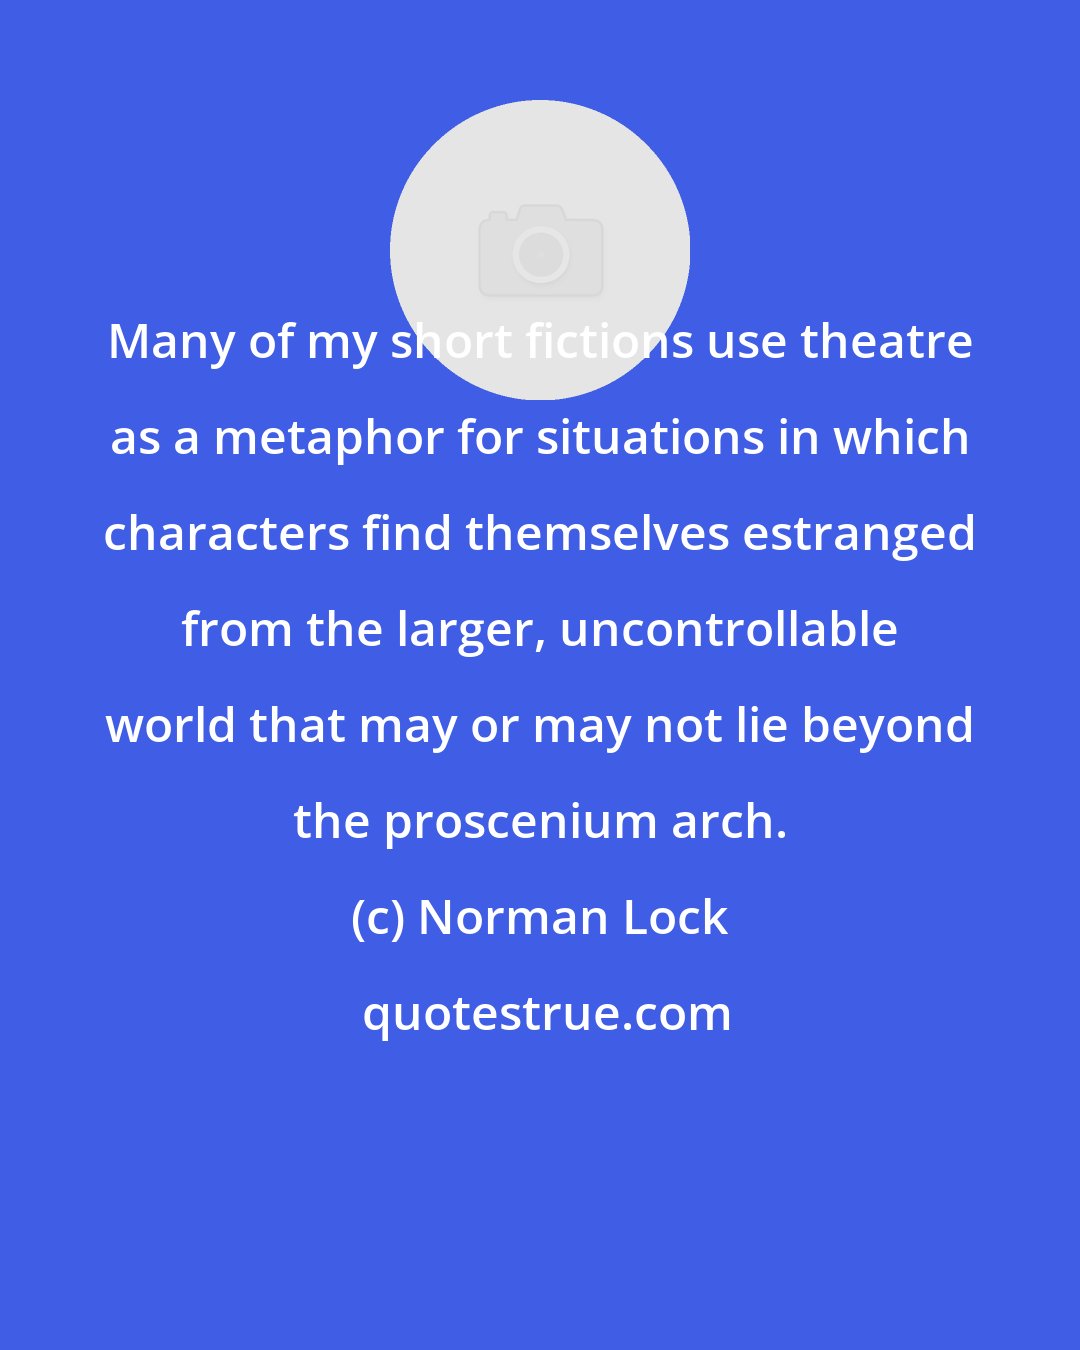 Norman Lock: Many of my short fictions use theatre as a metaphor for situations in which characters find themselves estranged from the larger, uncontrollable world that may or may not lie beyond the proscenium arch.